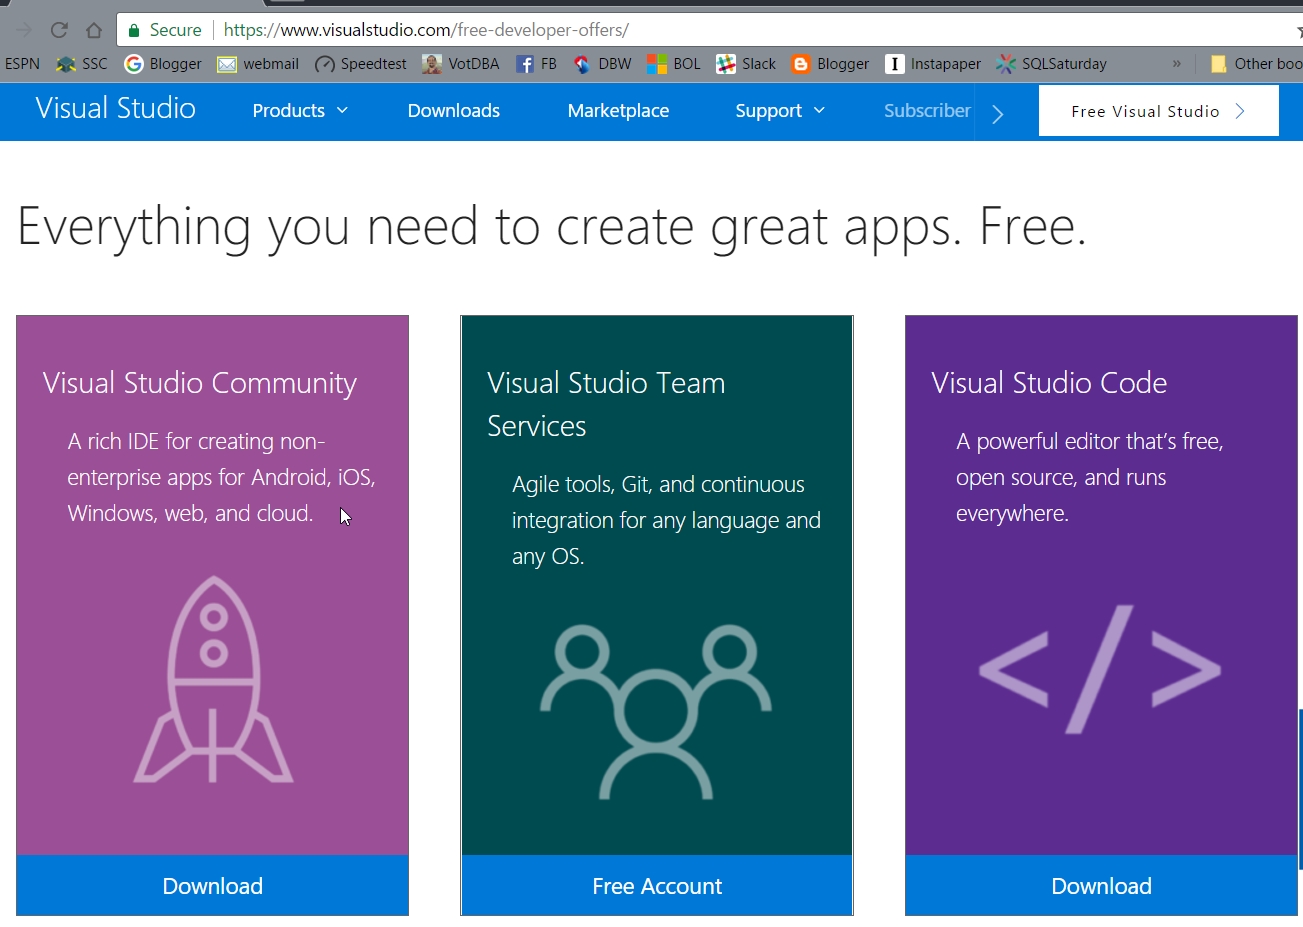 VisualStudio.com Developer Offers, which include the option to download Studio Community, Sign up for a Free Account with Visual Studio Team Services, and download Visual Studio Code.